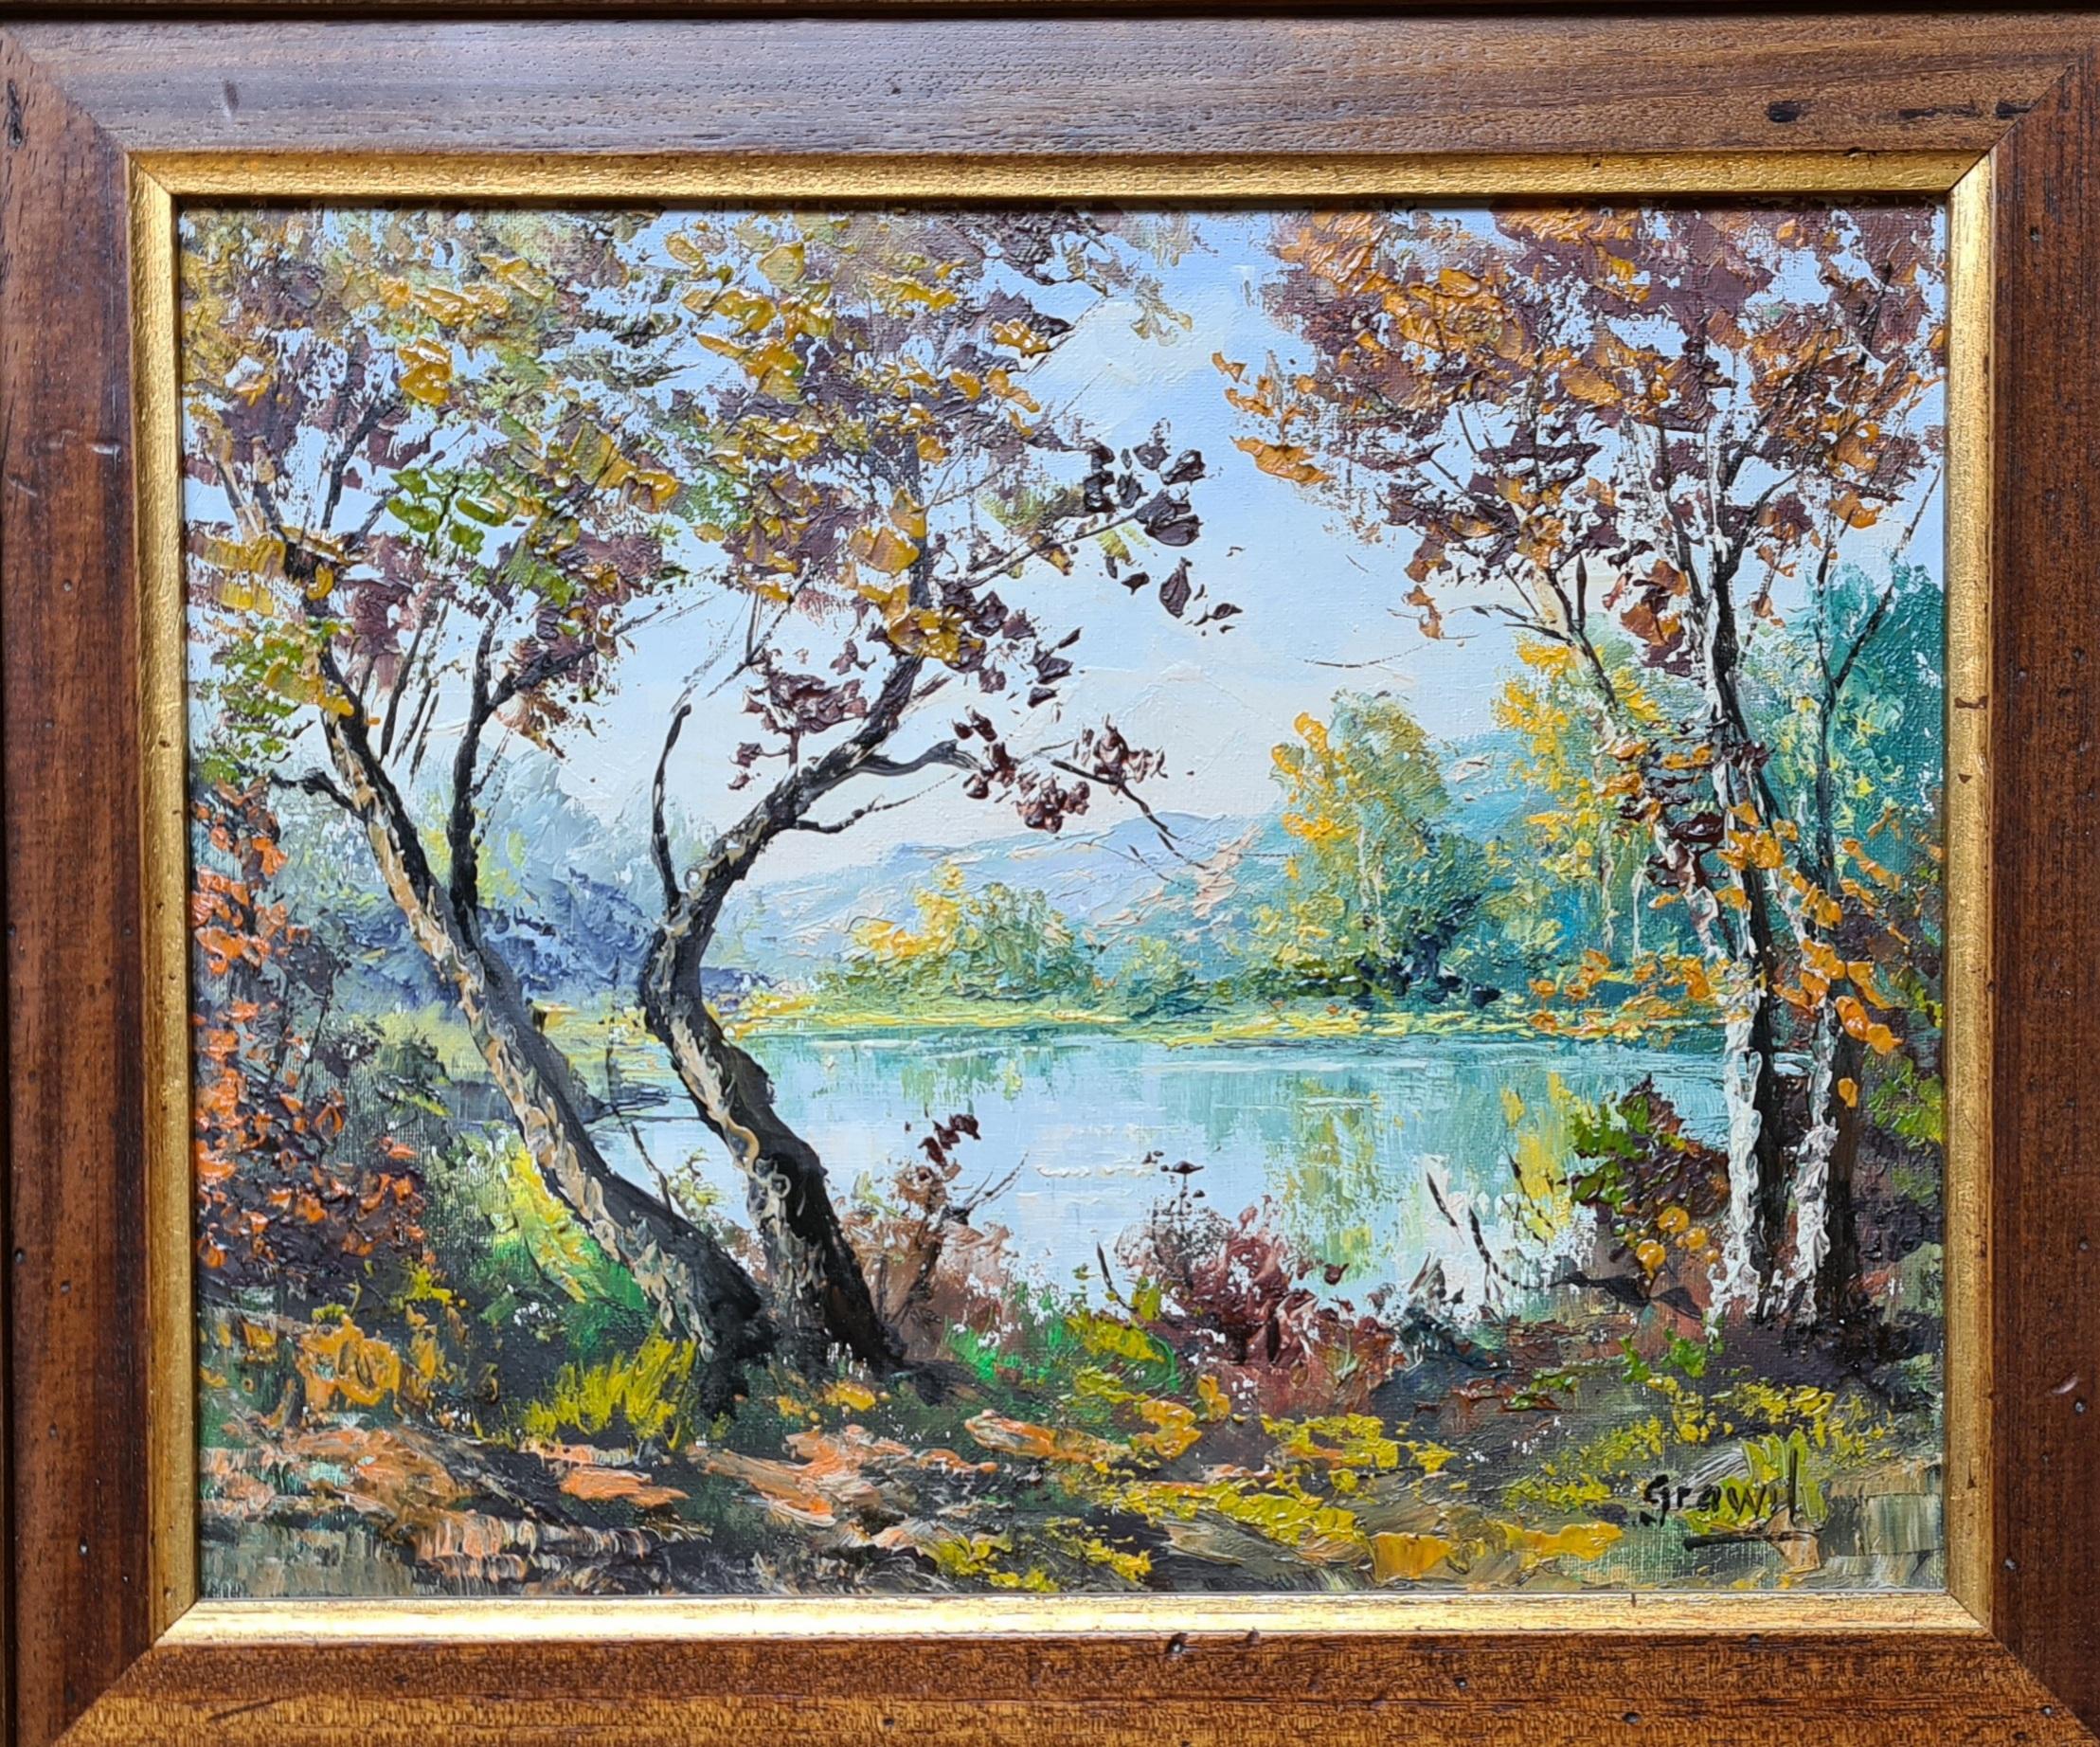 Summer at the Lake. French Oil on Canvas Landscape. - Painting by Maurice Schwab aka 'Grawil'